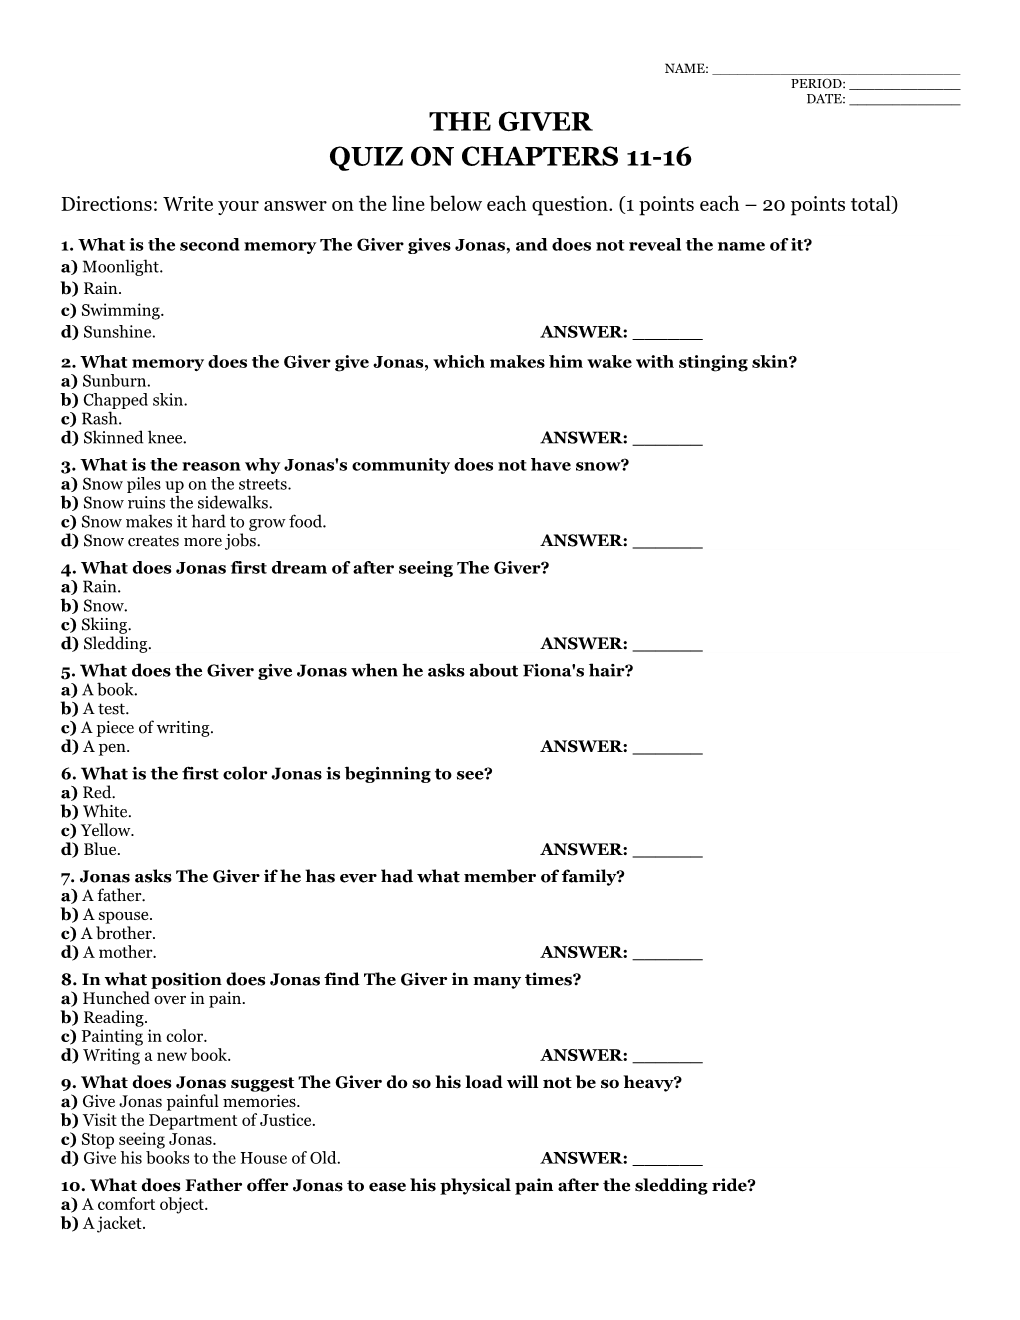 The Giver Quiz on Chapters 11-16